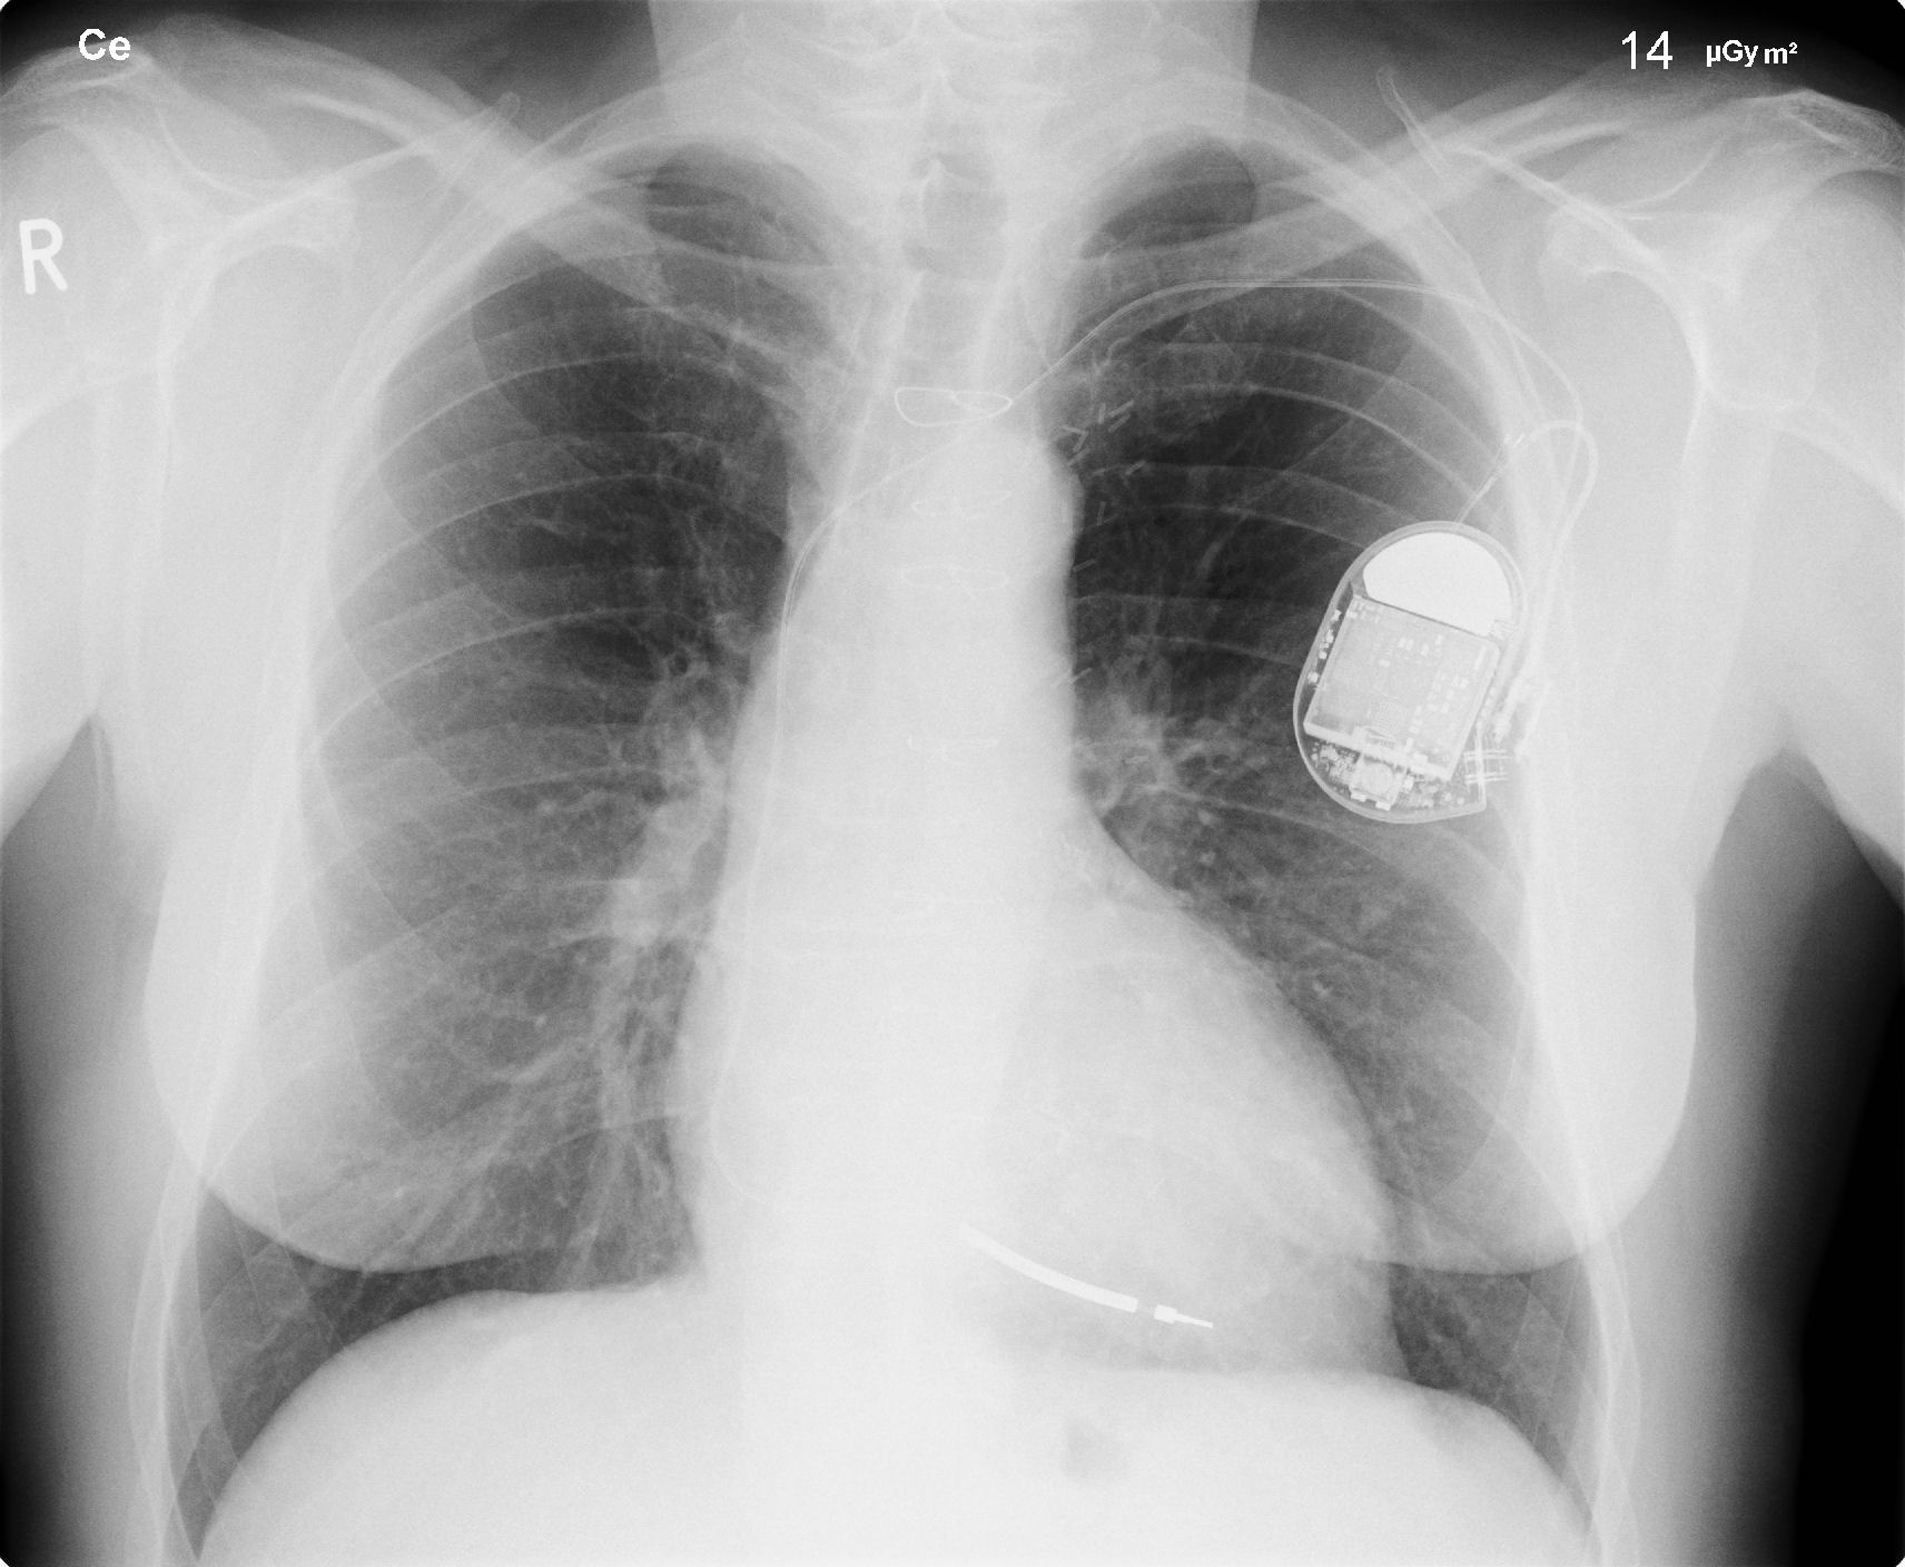 An X-ray image of a person’s chest is shown, clearly showing a pacemaker in the left side.